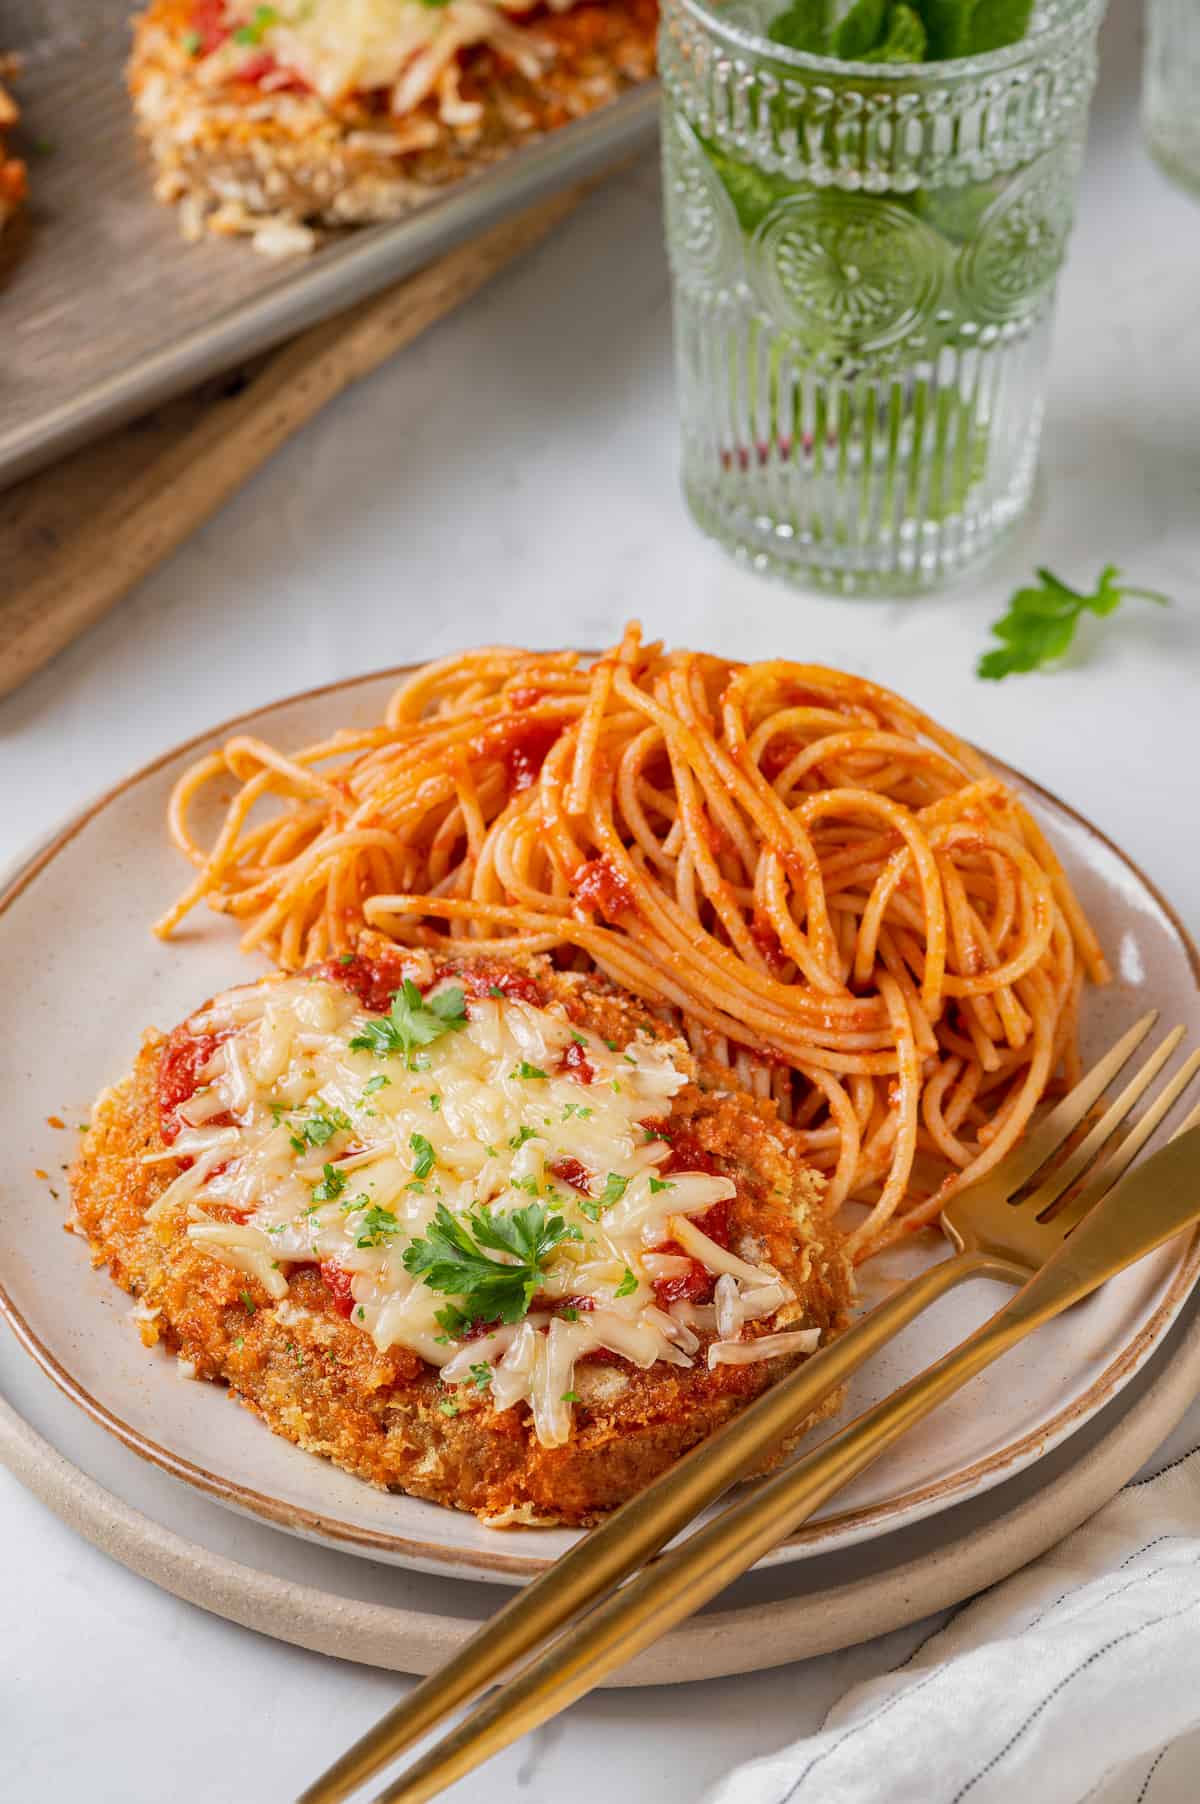 Chicken parmesan on plate with spaghetti, fork, and knife